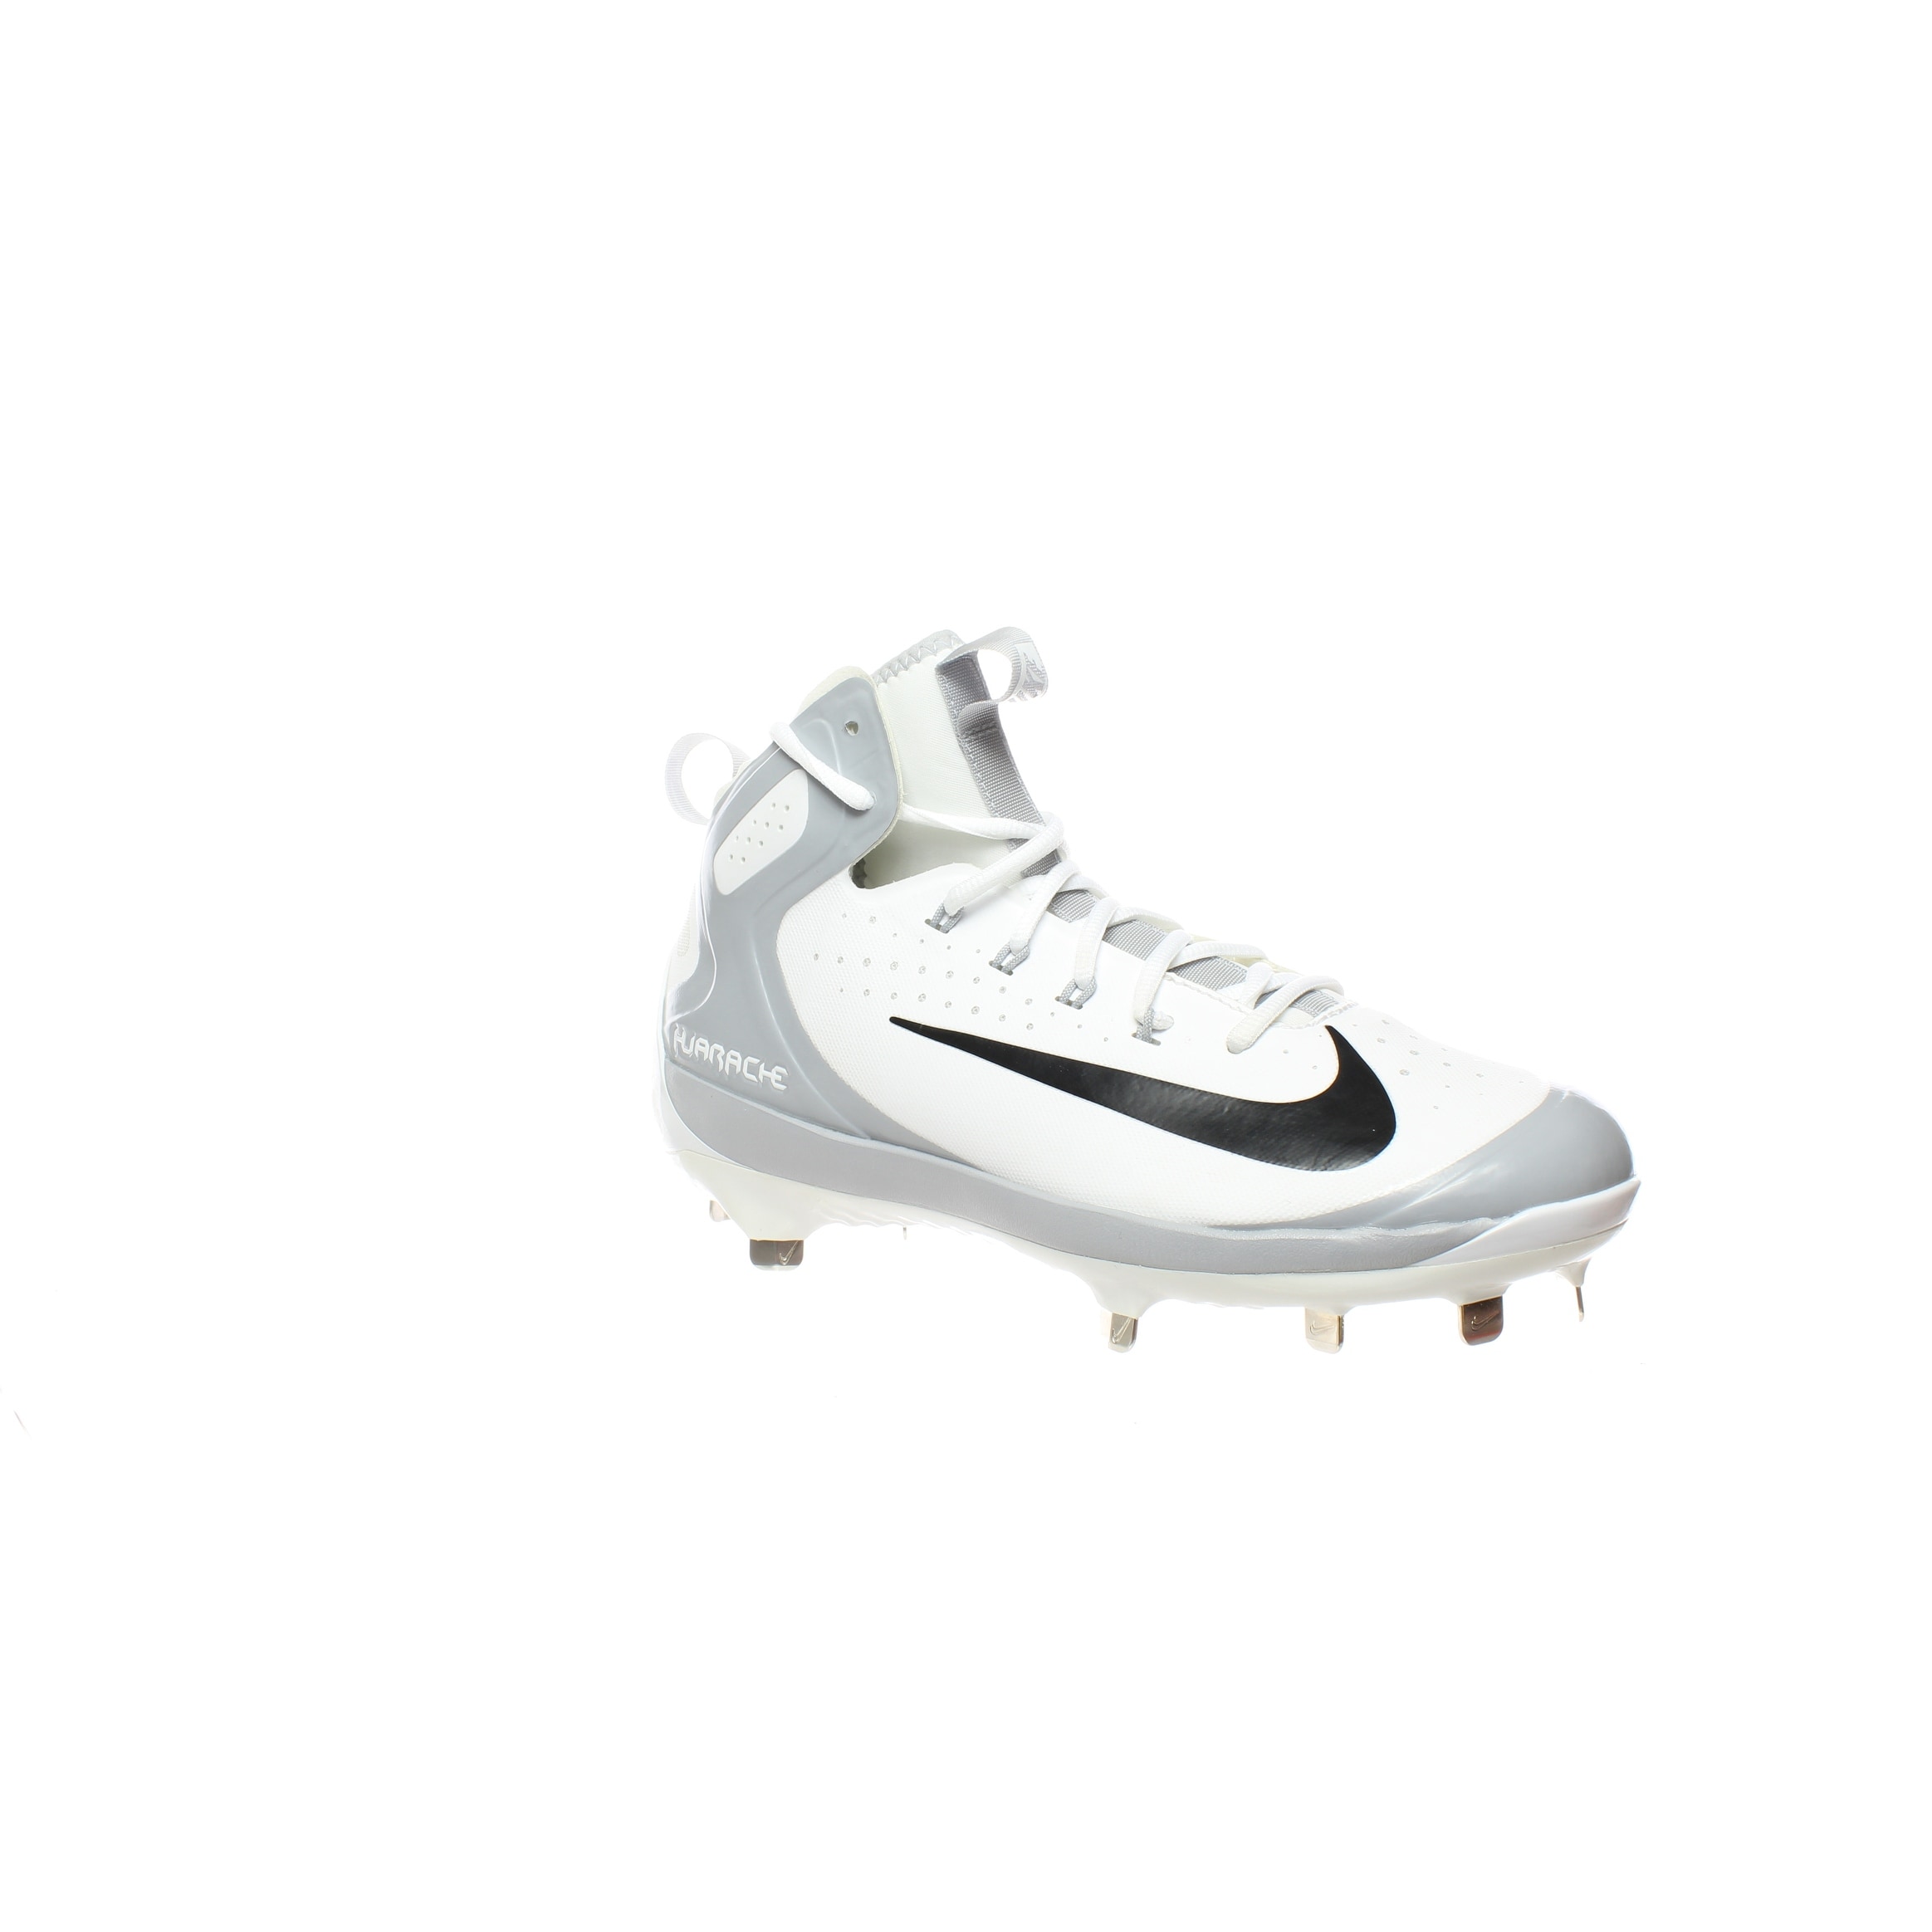 football cleats size 8.5